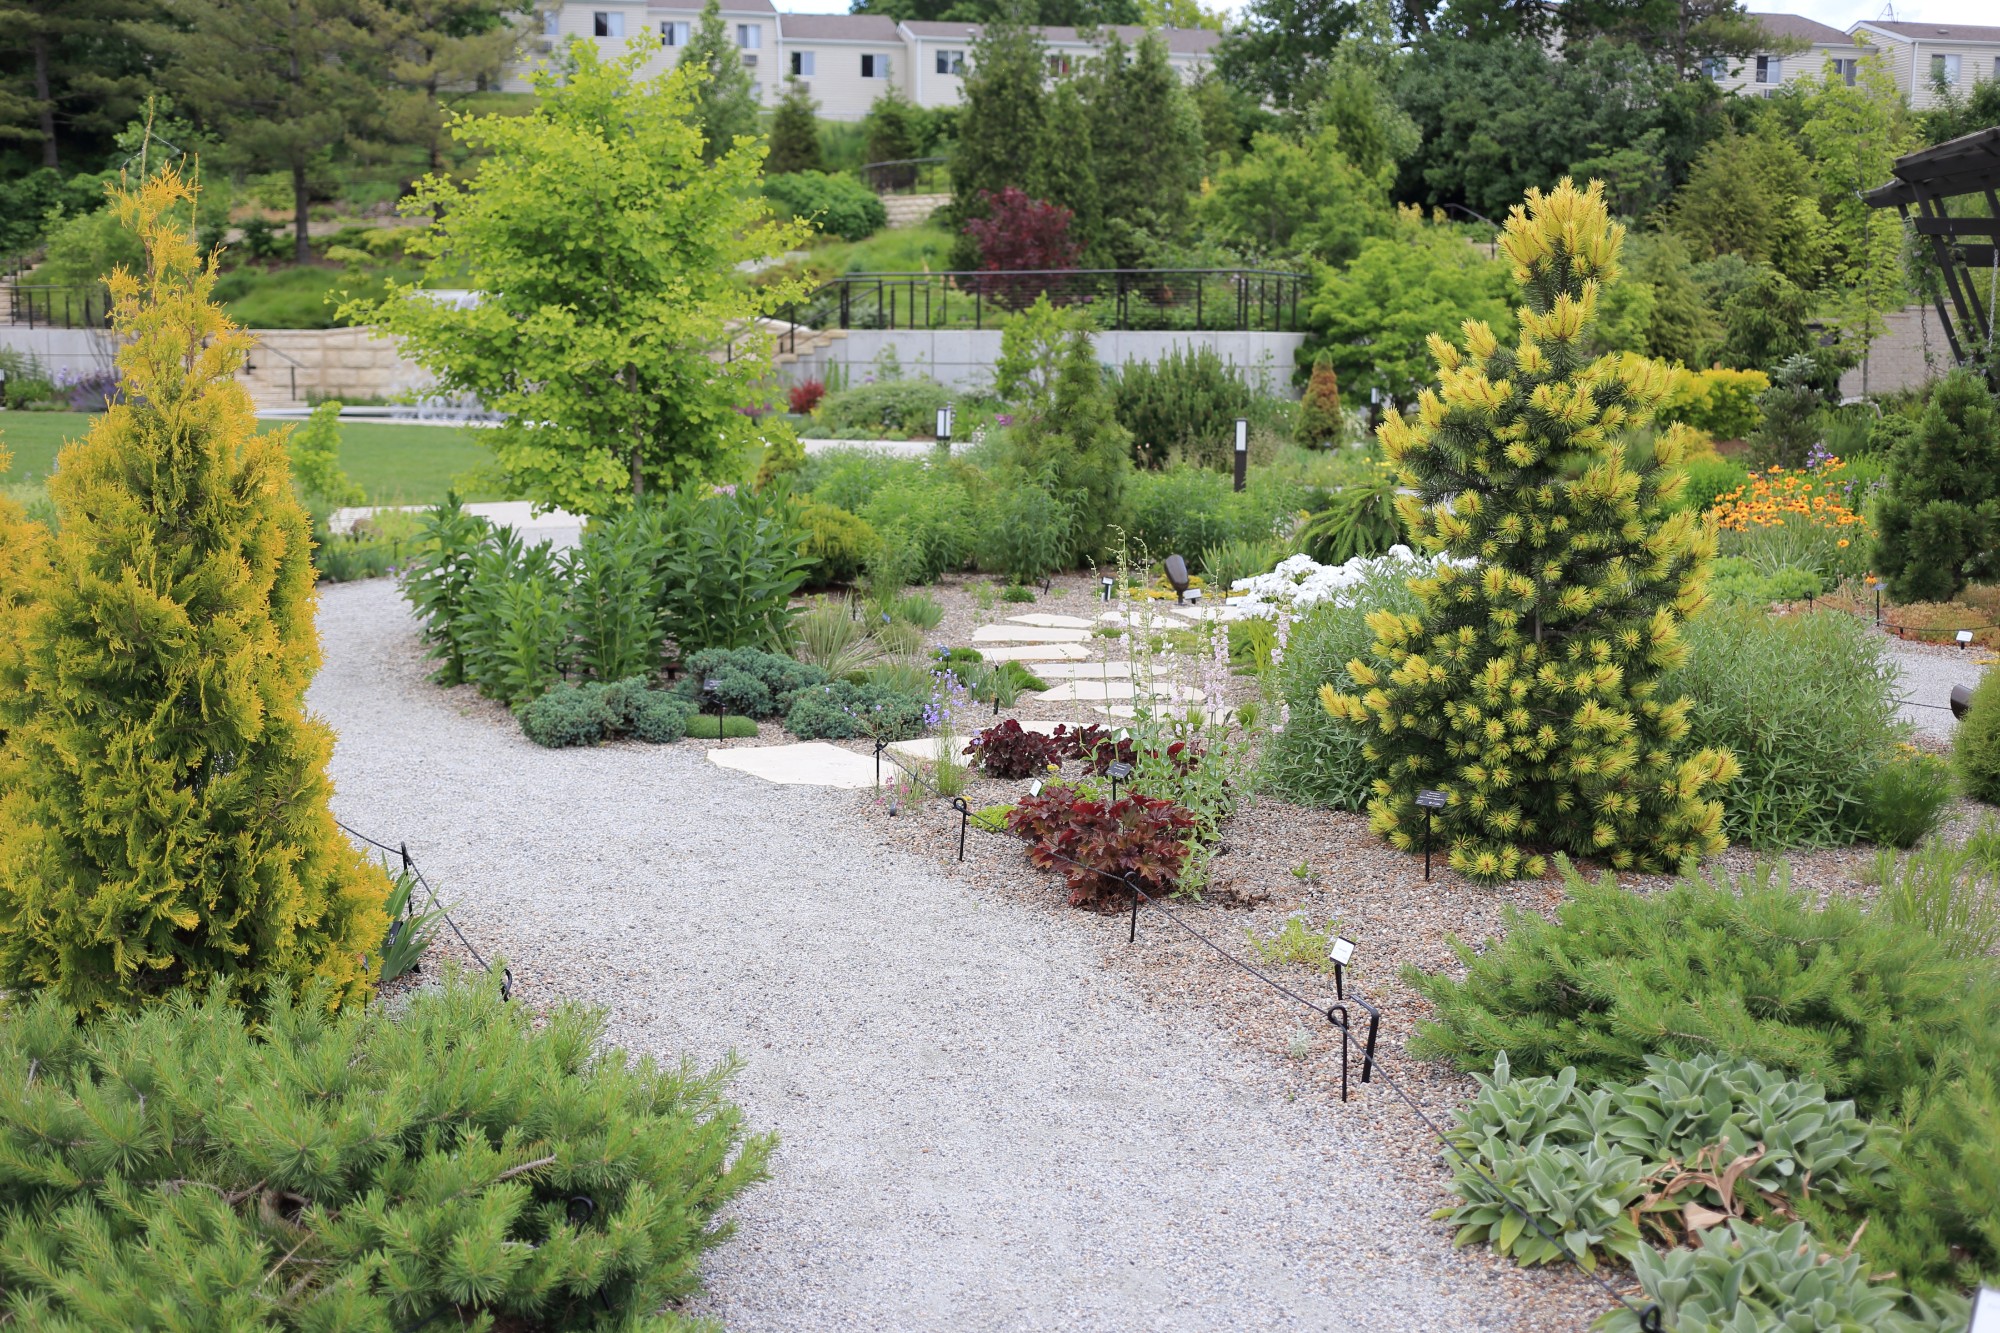 The Rutledge Conifer and Gravel Garden on June 1. Photo by Kelly Norris.